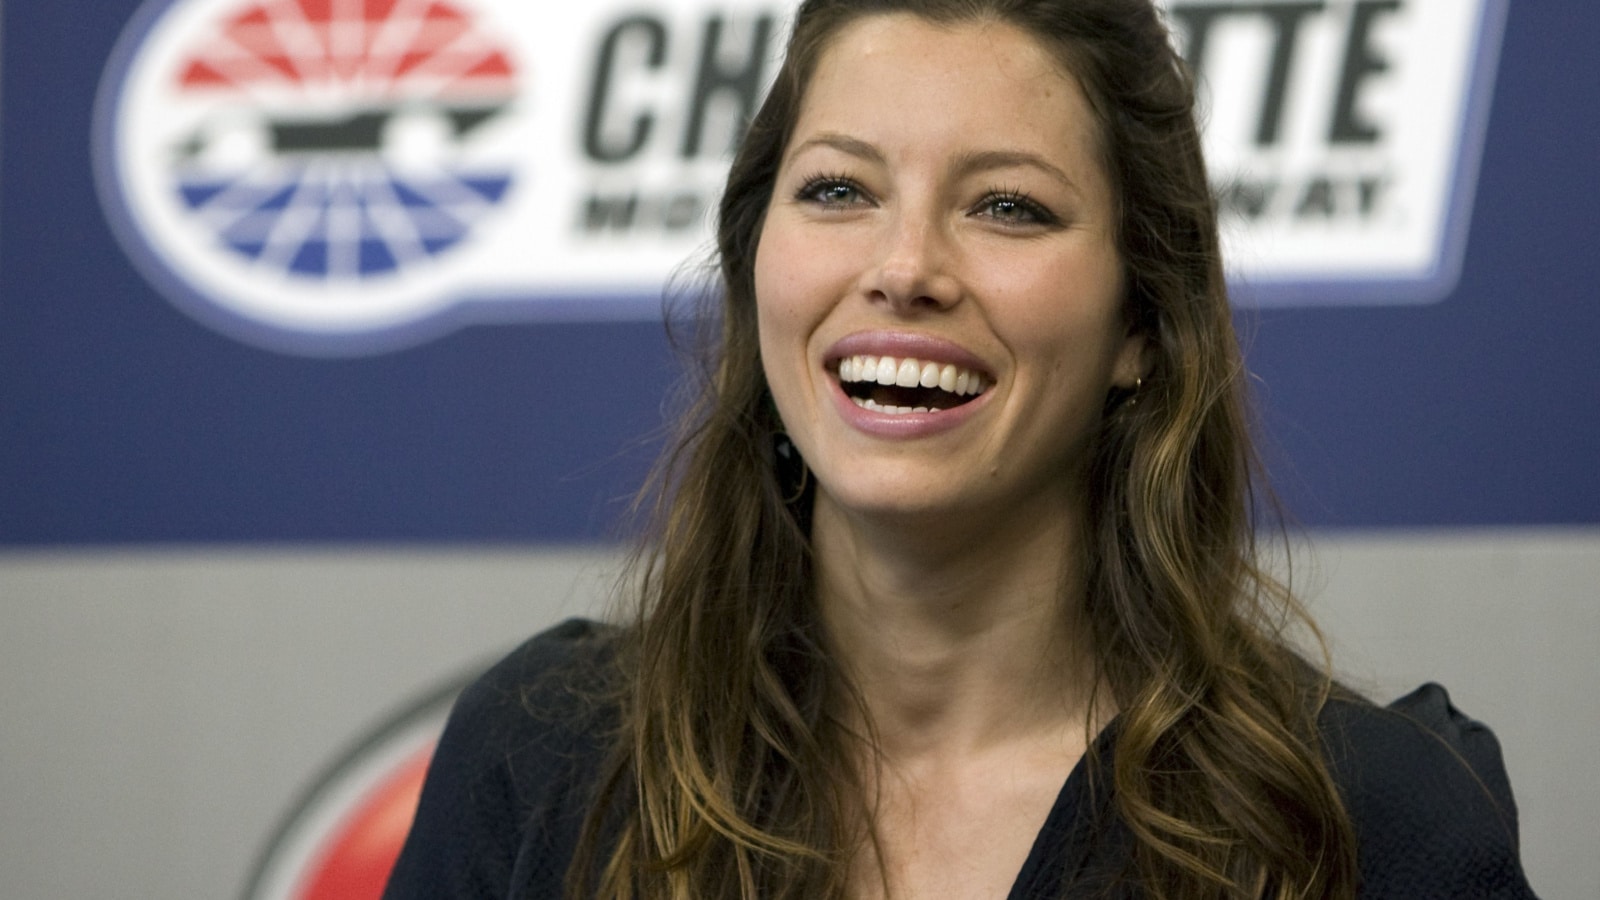 CONCORD, NC - MAY 30: Jessica Biel, actress from the new movie The A-Team, during a press conference before the Coca-Cola 600 Race at the Charlotte Motor Speedway in Concord, NC on May 30, 2010